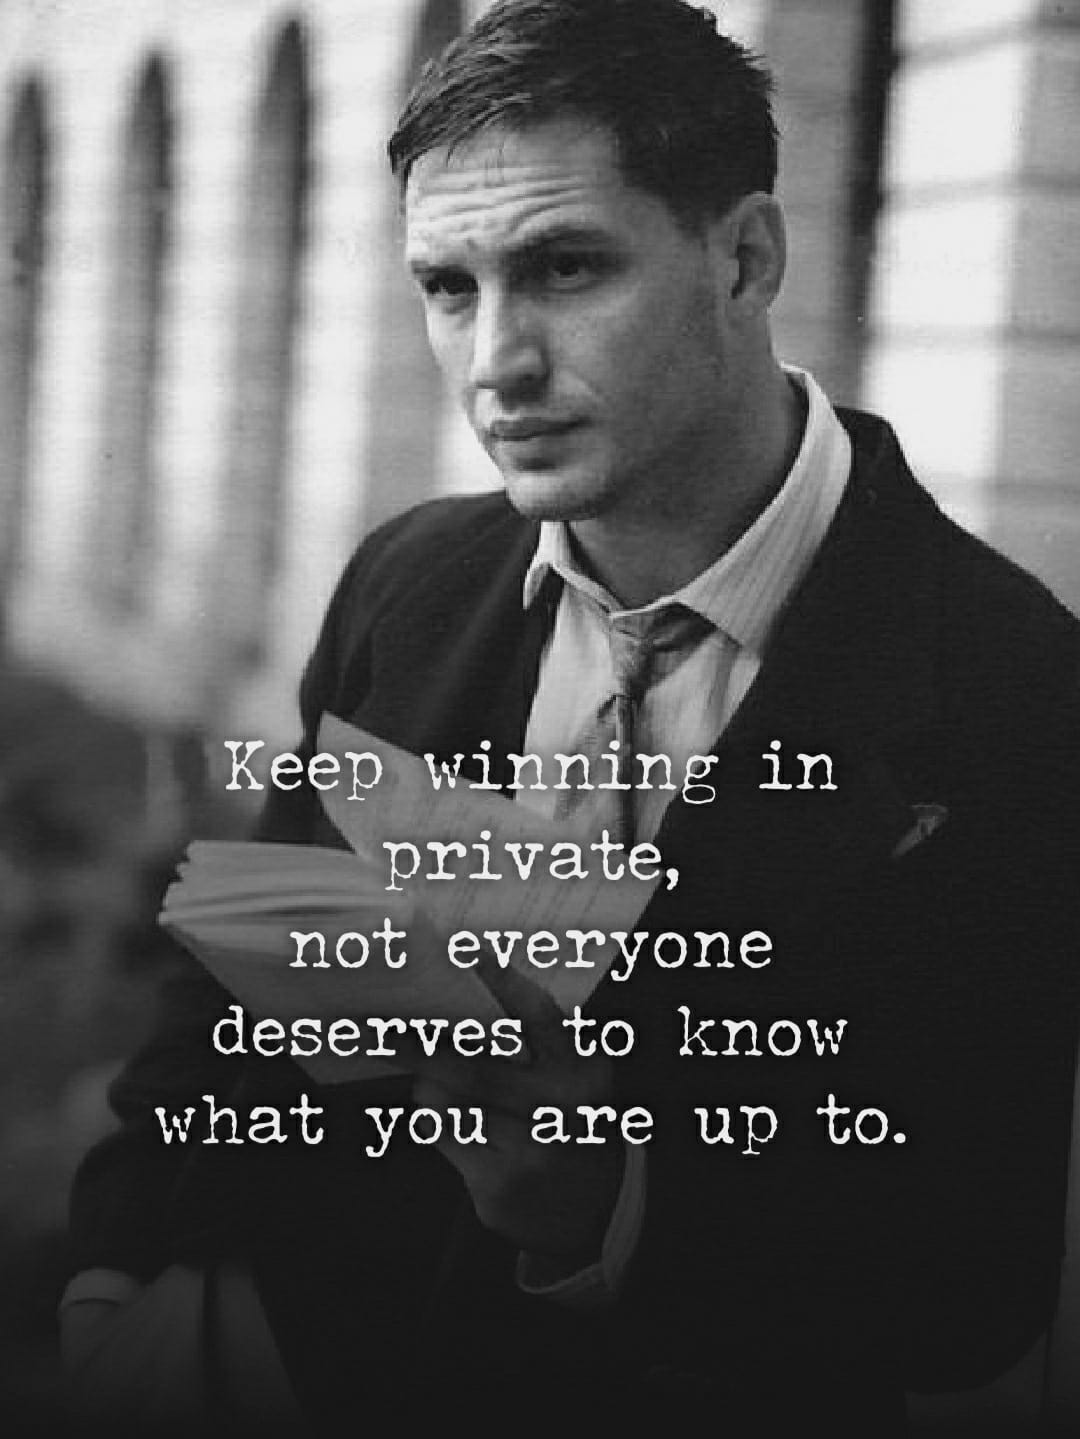 keep winning in private. not everyone needs to know what you’re up to.